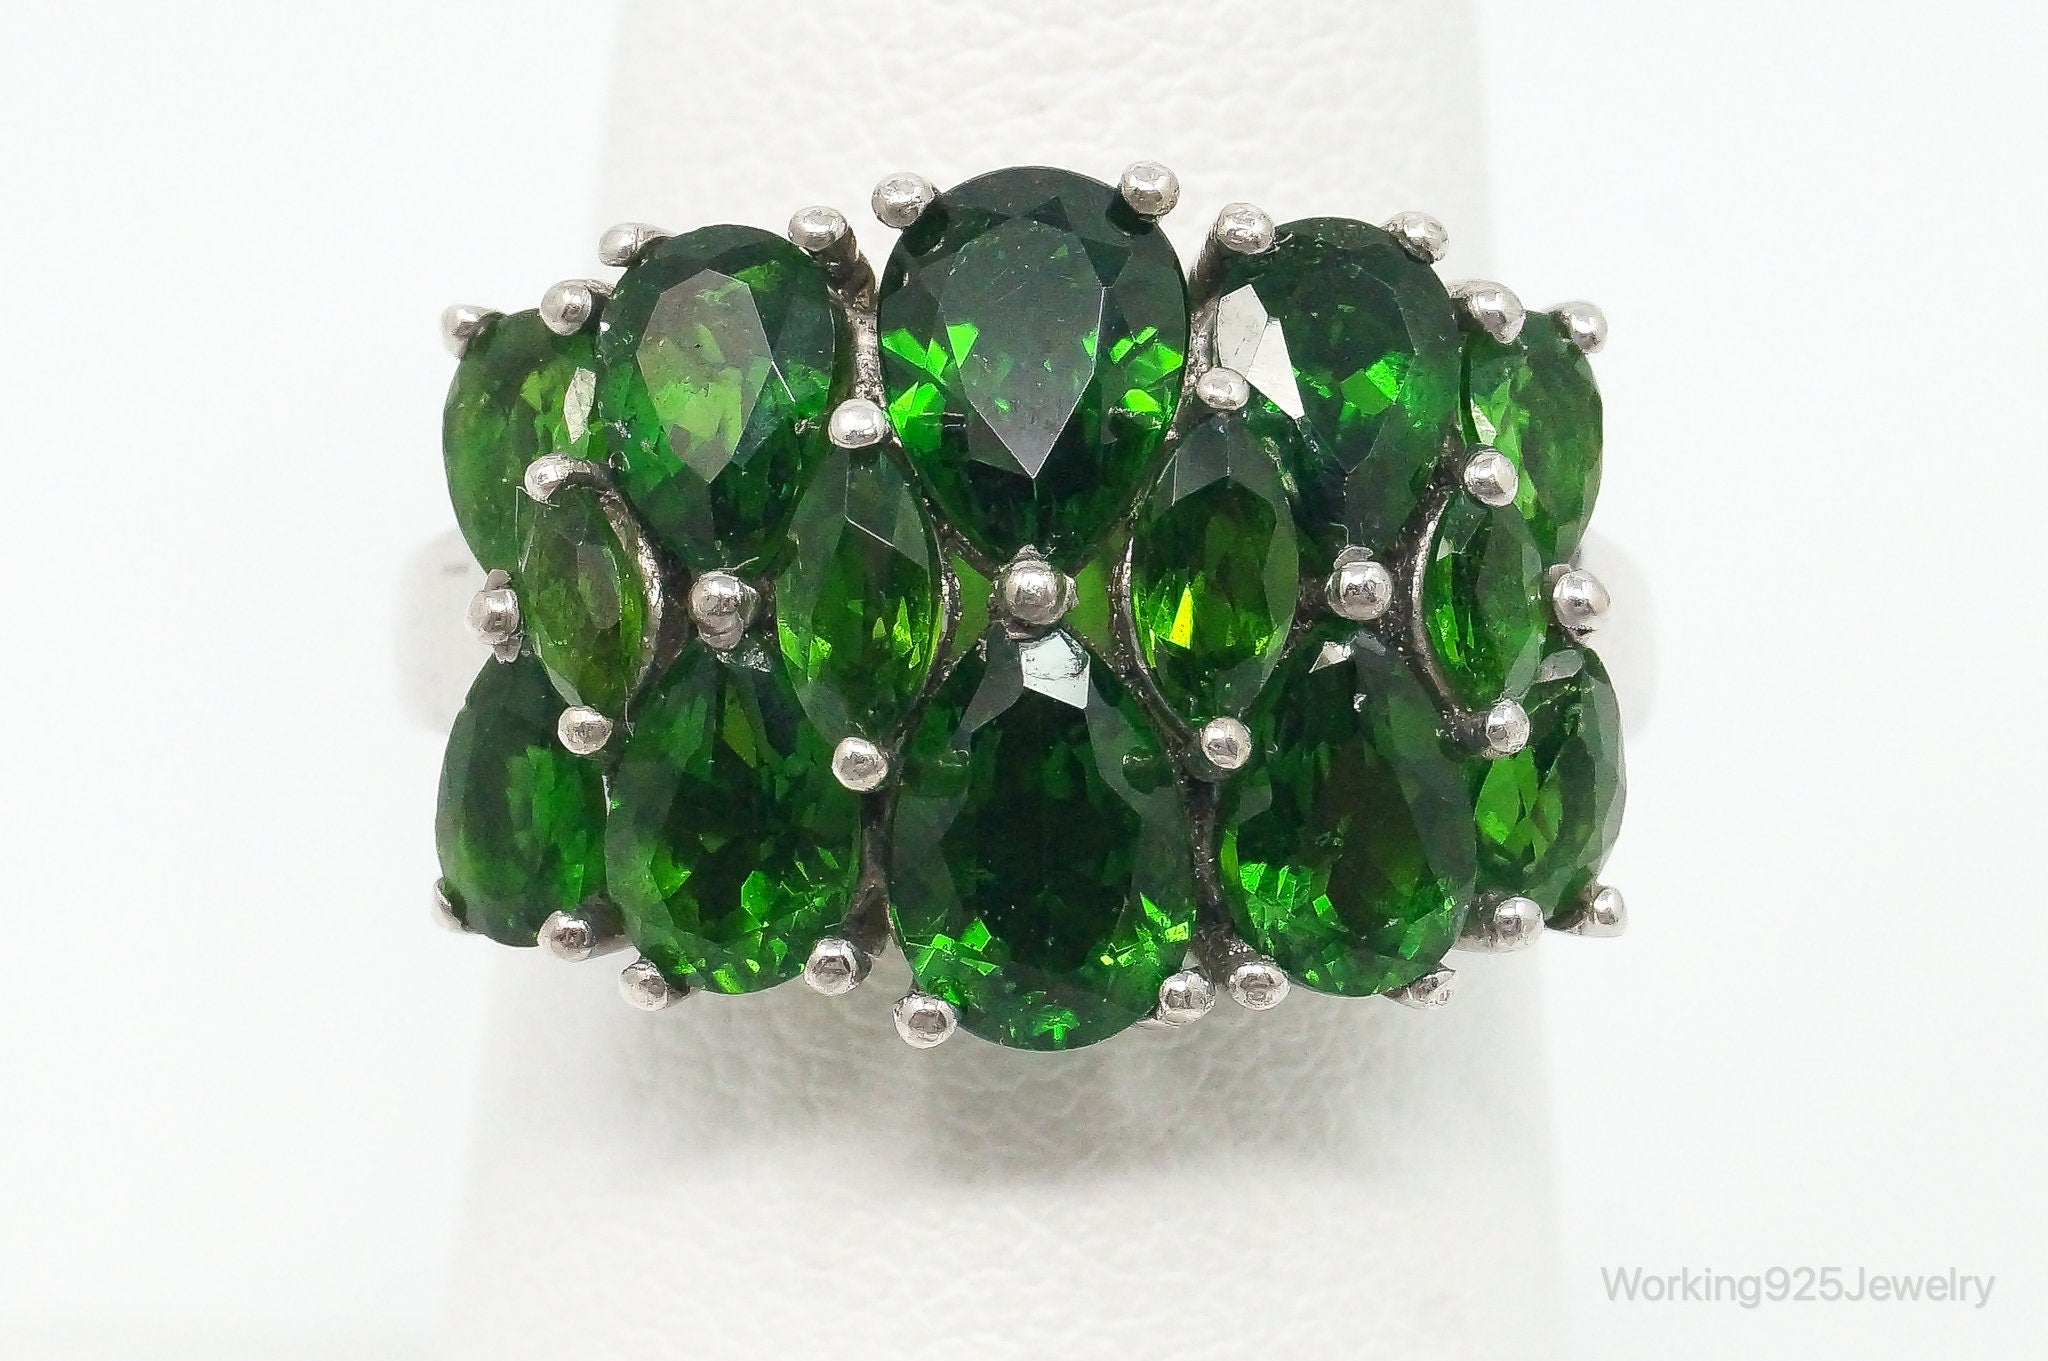 Vintage Peridot Art Deco Sterling Silver Ring - Size 7